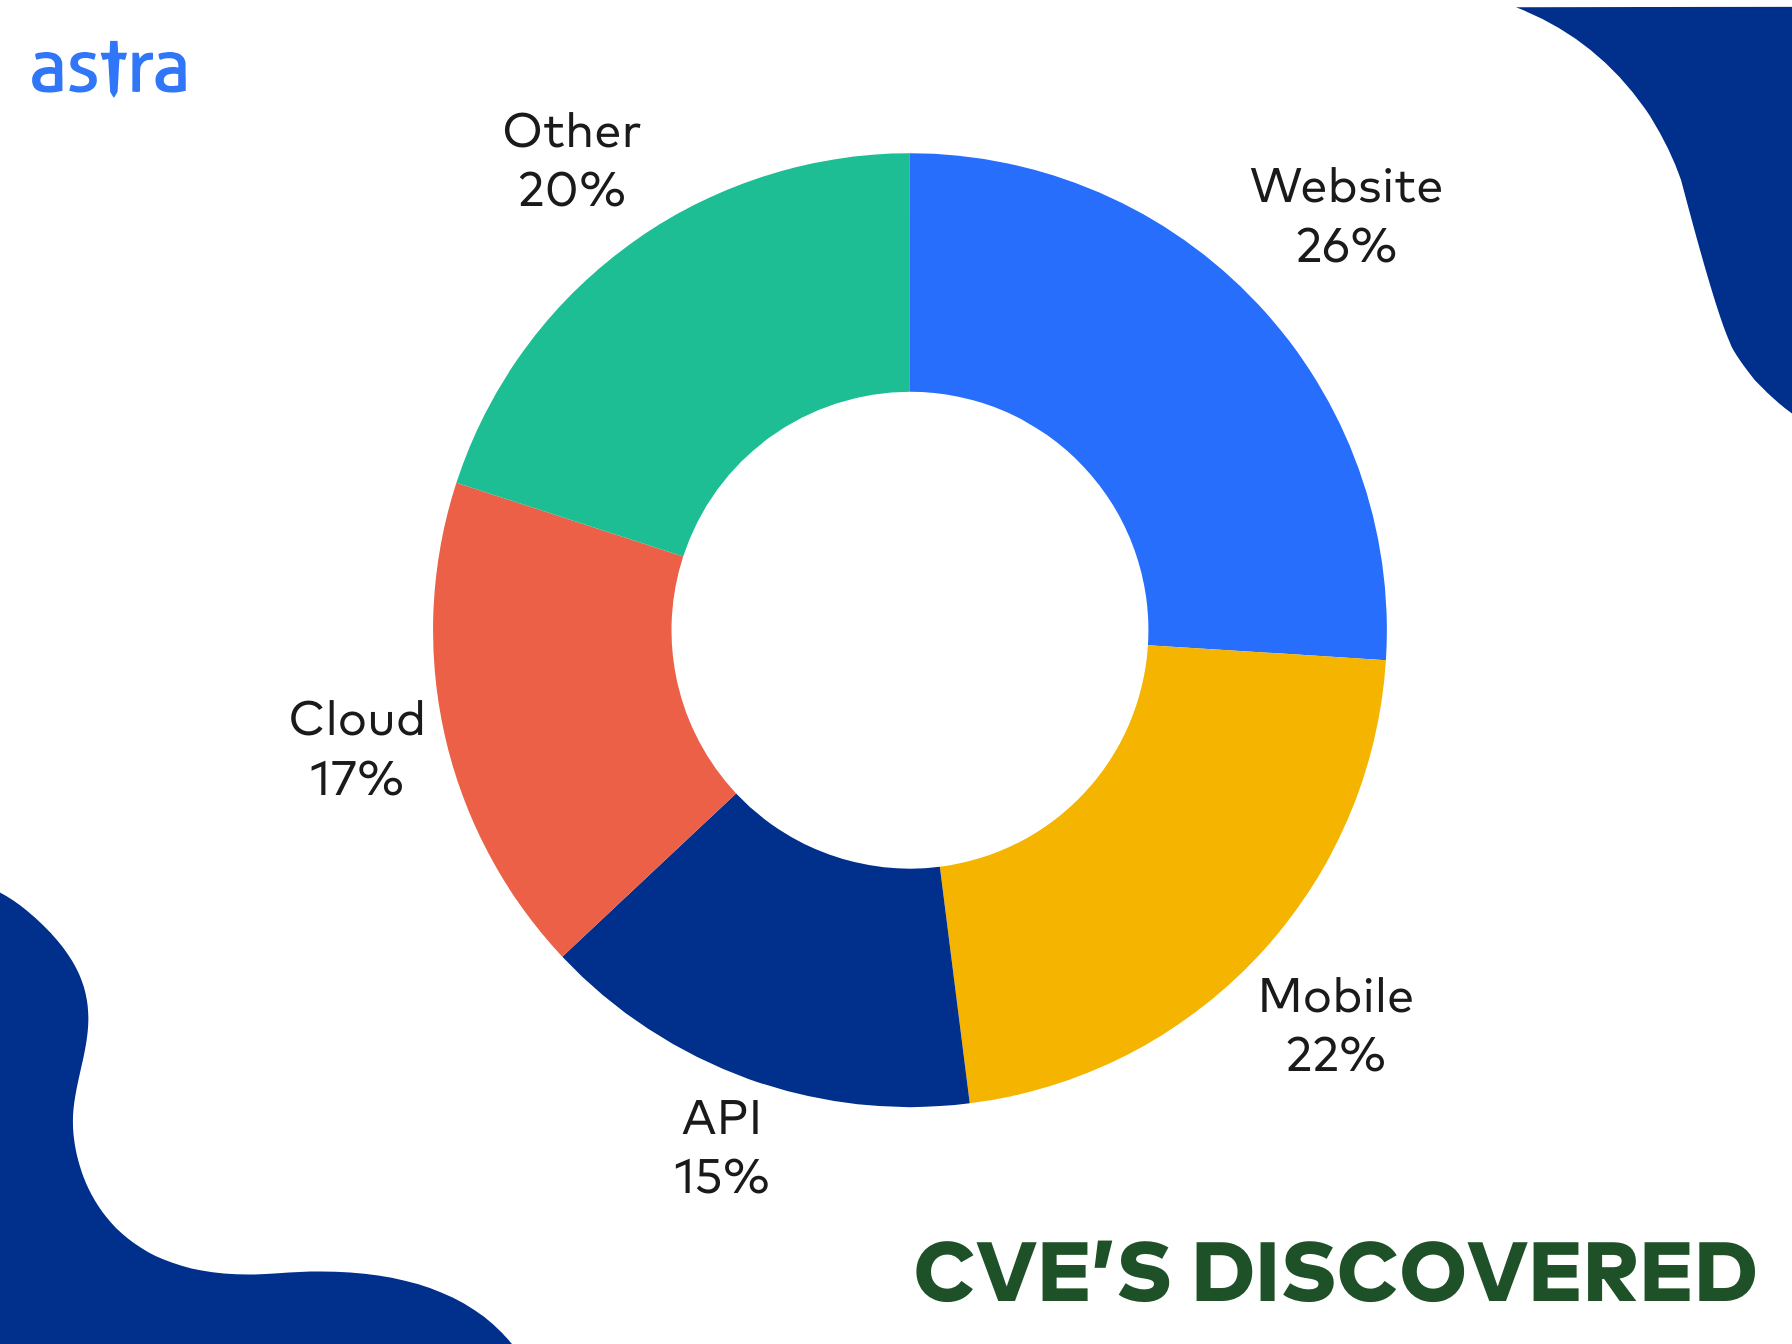 CVE's Discovered as percentages